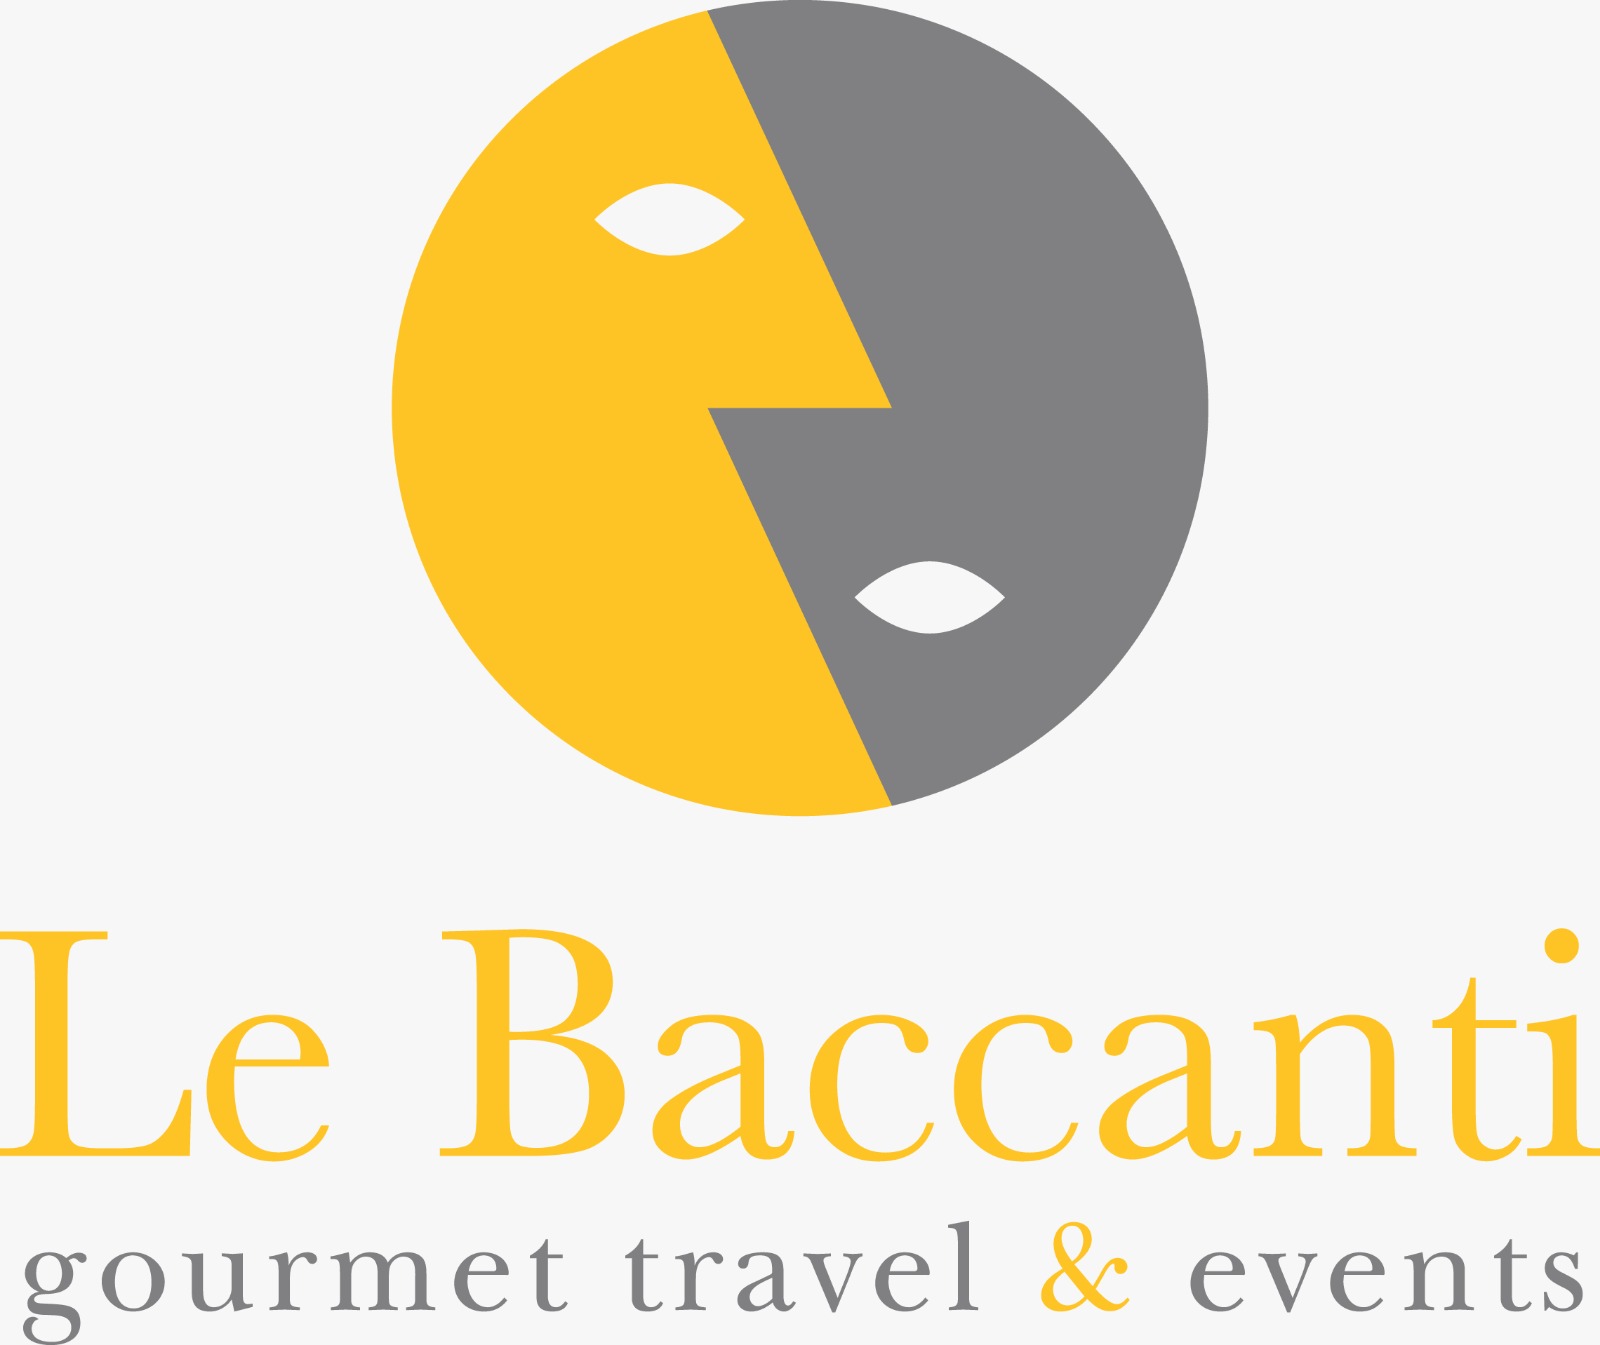 Le Baccanti - Gourmet Travel & Events